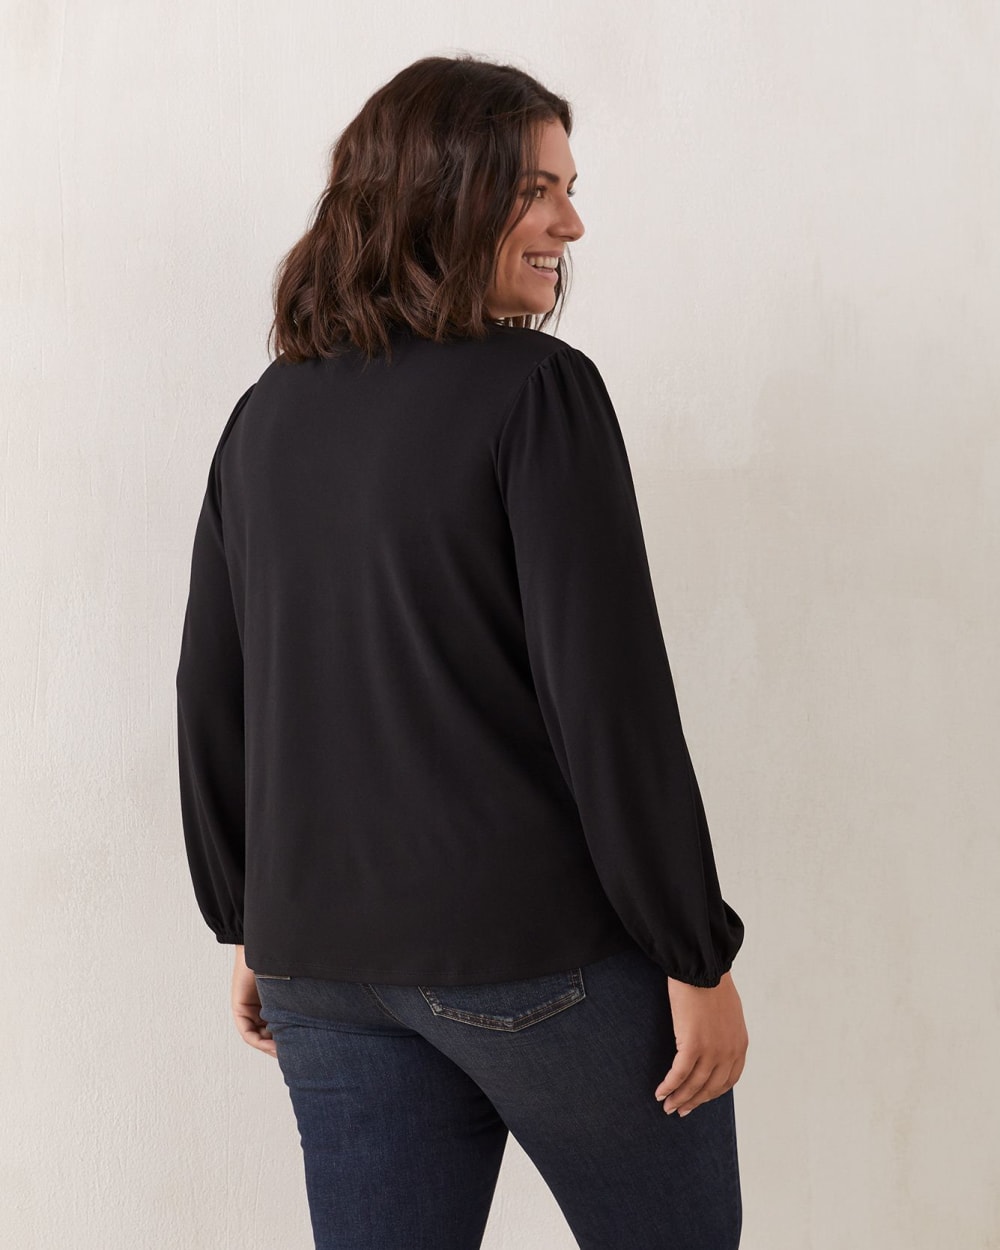 Long Puff Sleeve V-Neck Top - In Every Story